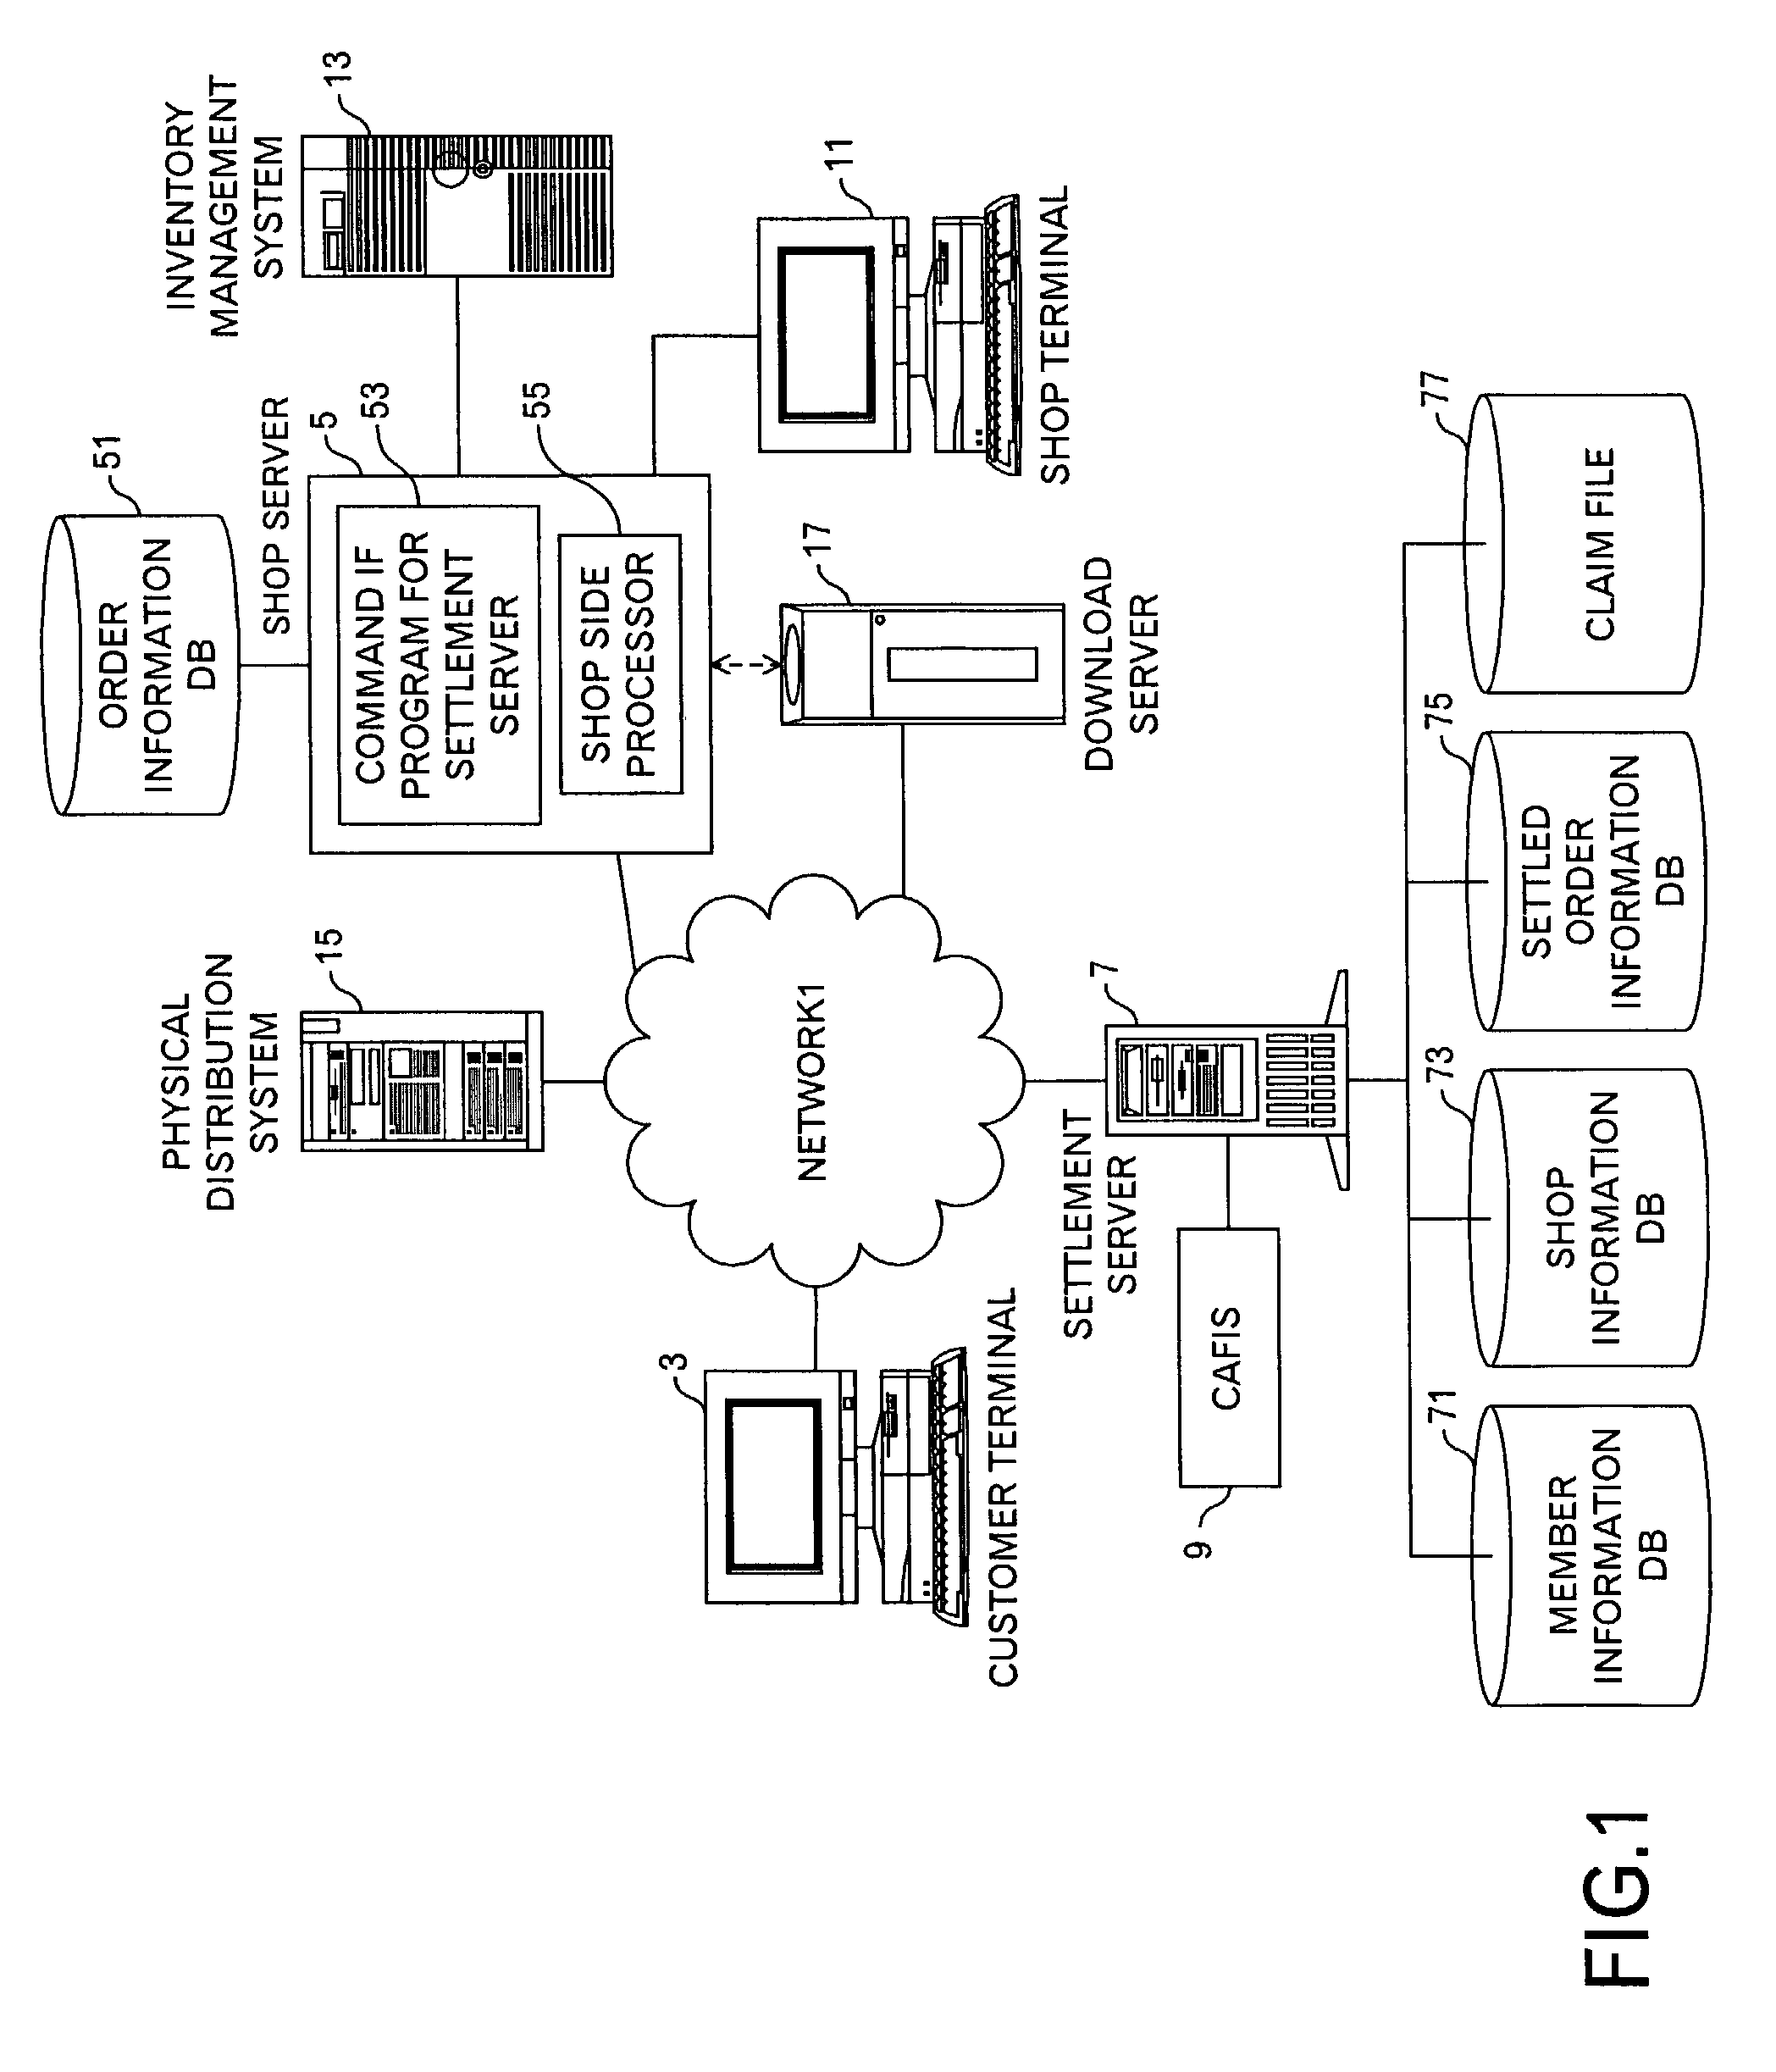 Order processing system and method